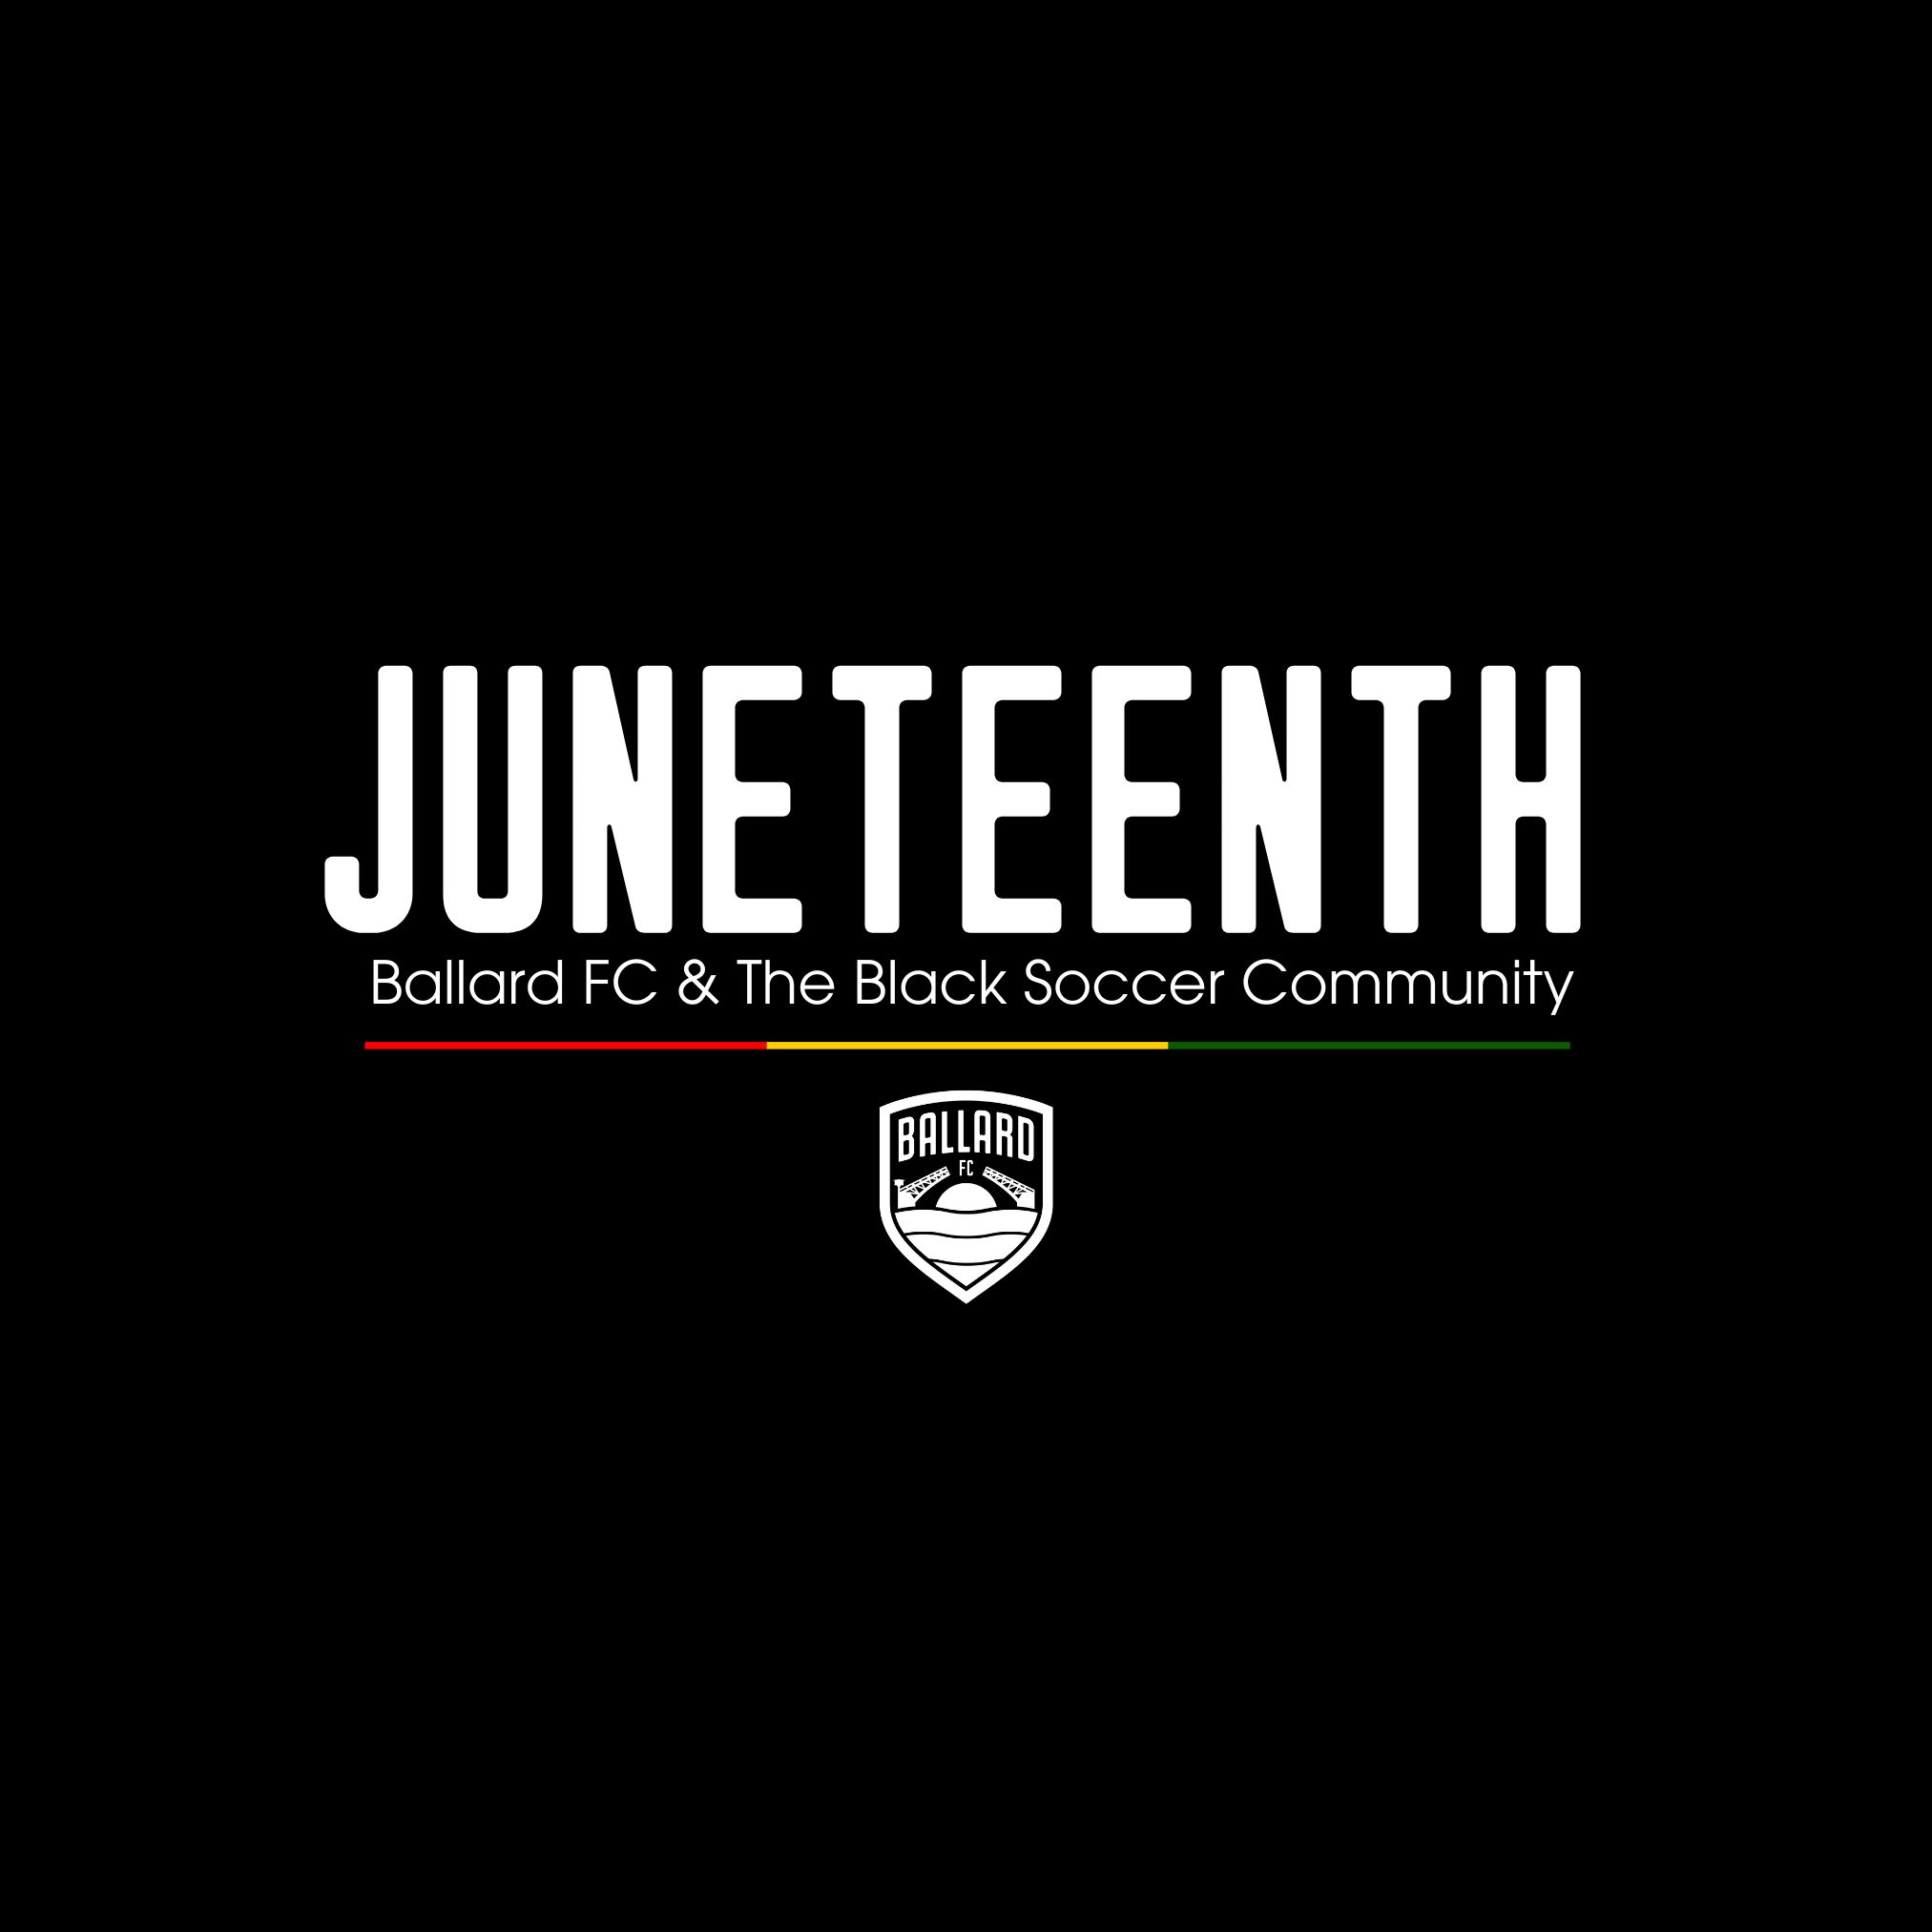 Celebrating our Black Soccer Community this Juneteenth featured image